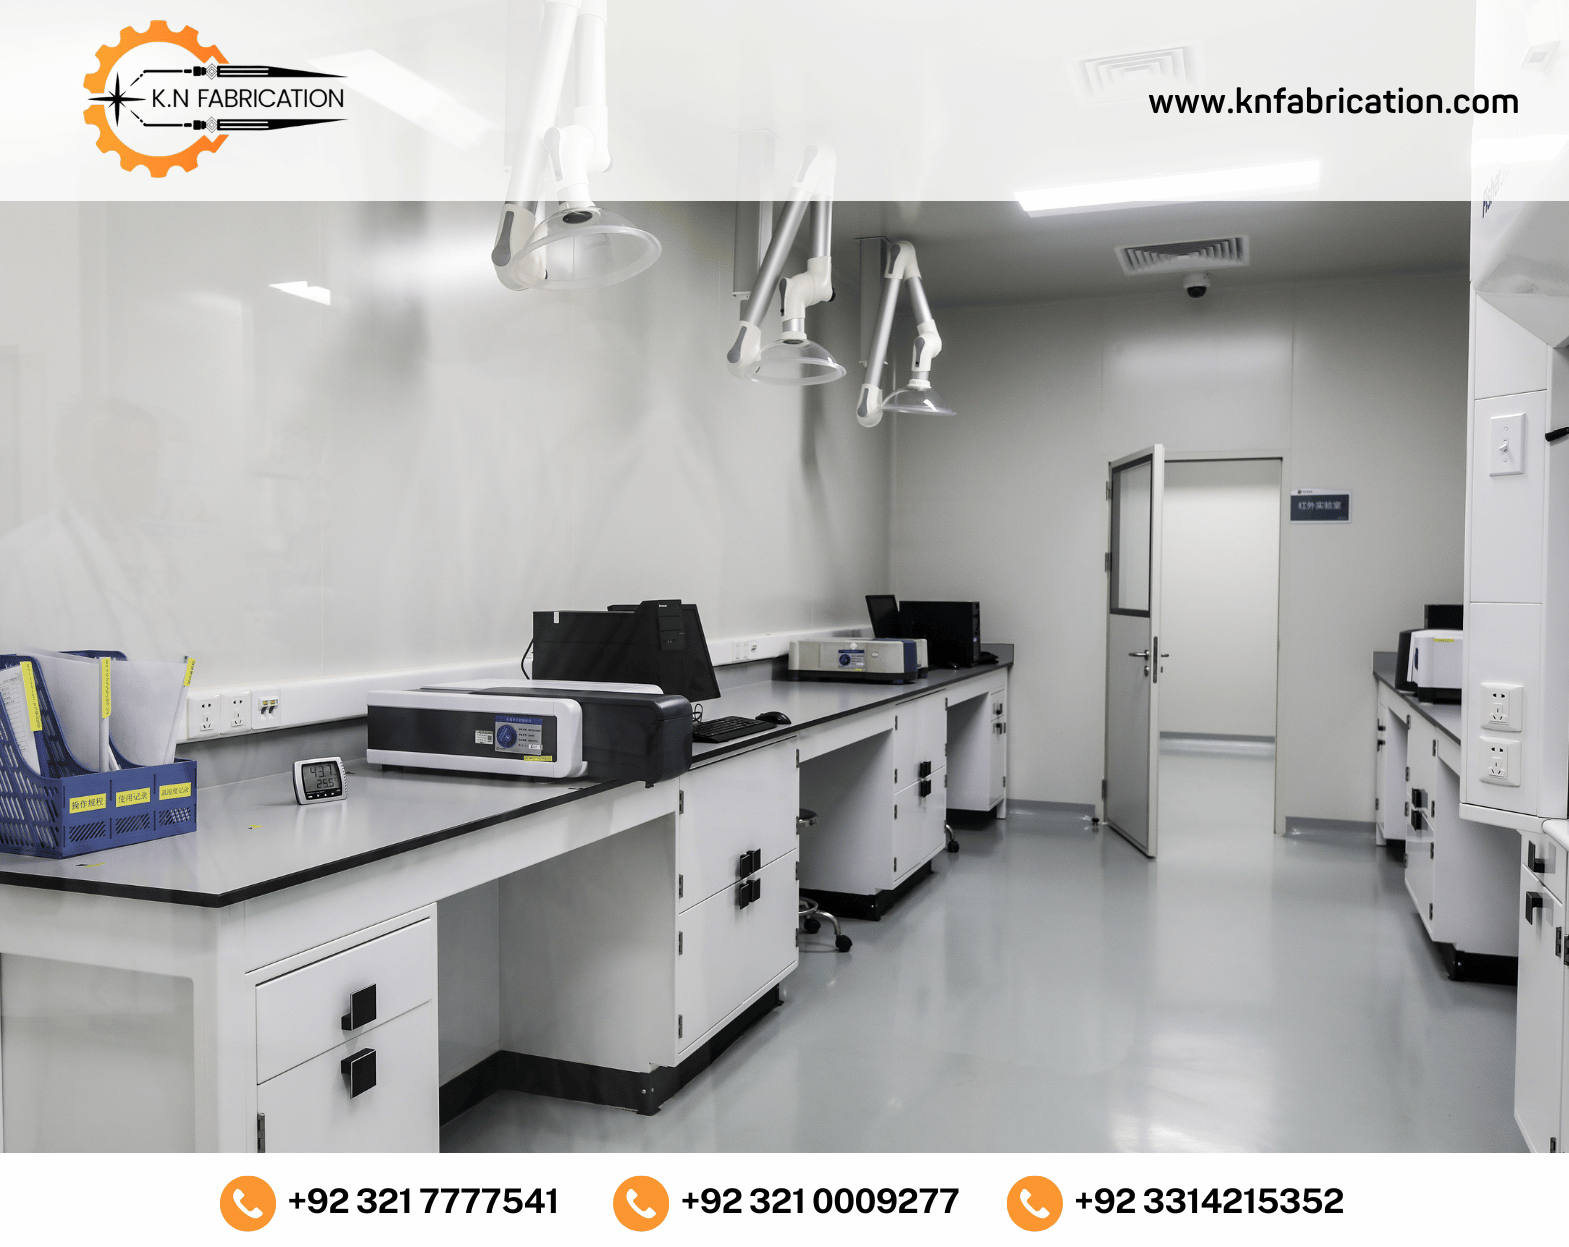 Laboratory Furniture in Pakistan by KN Fabrication